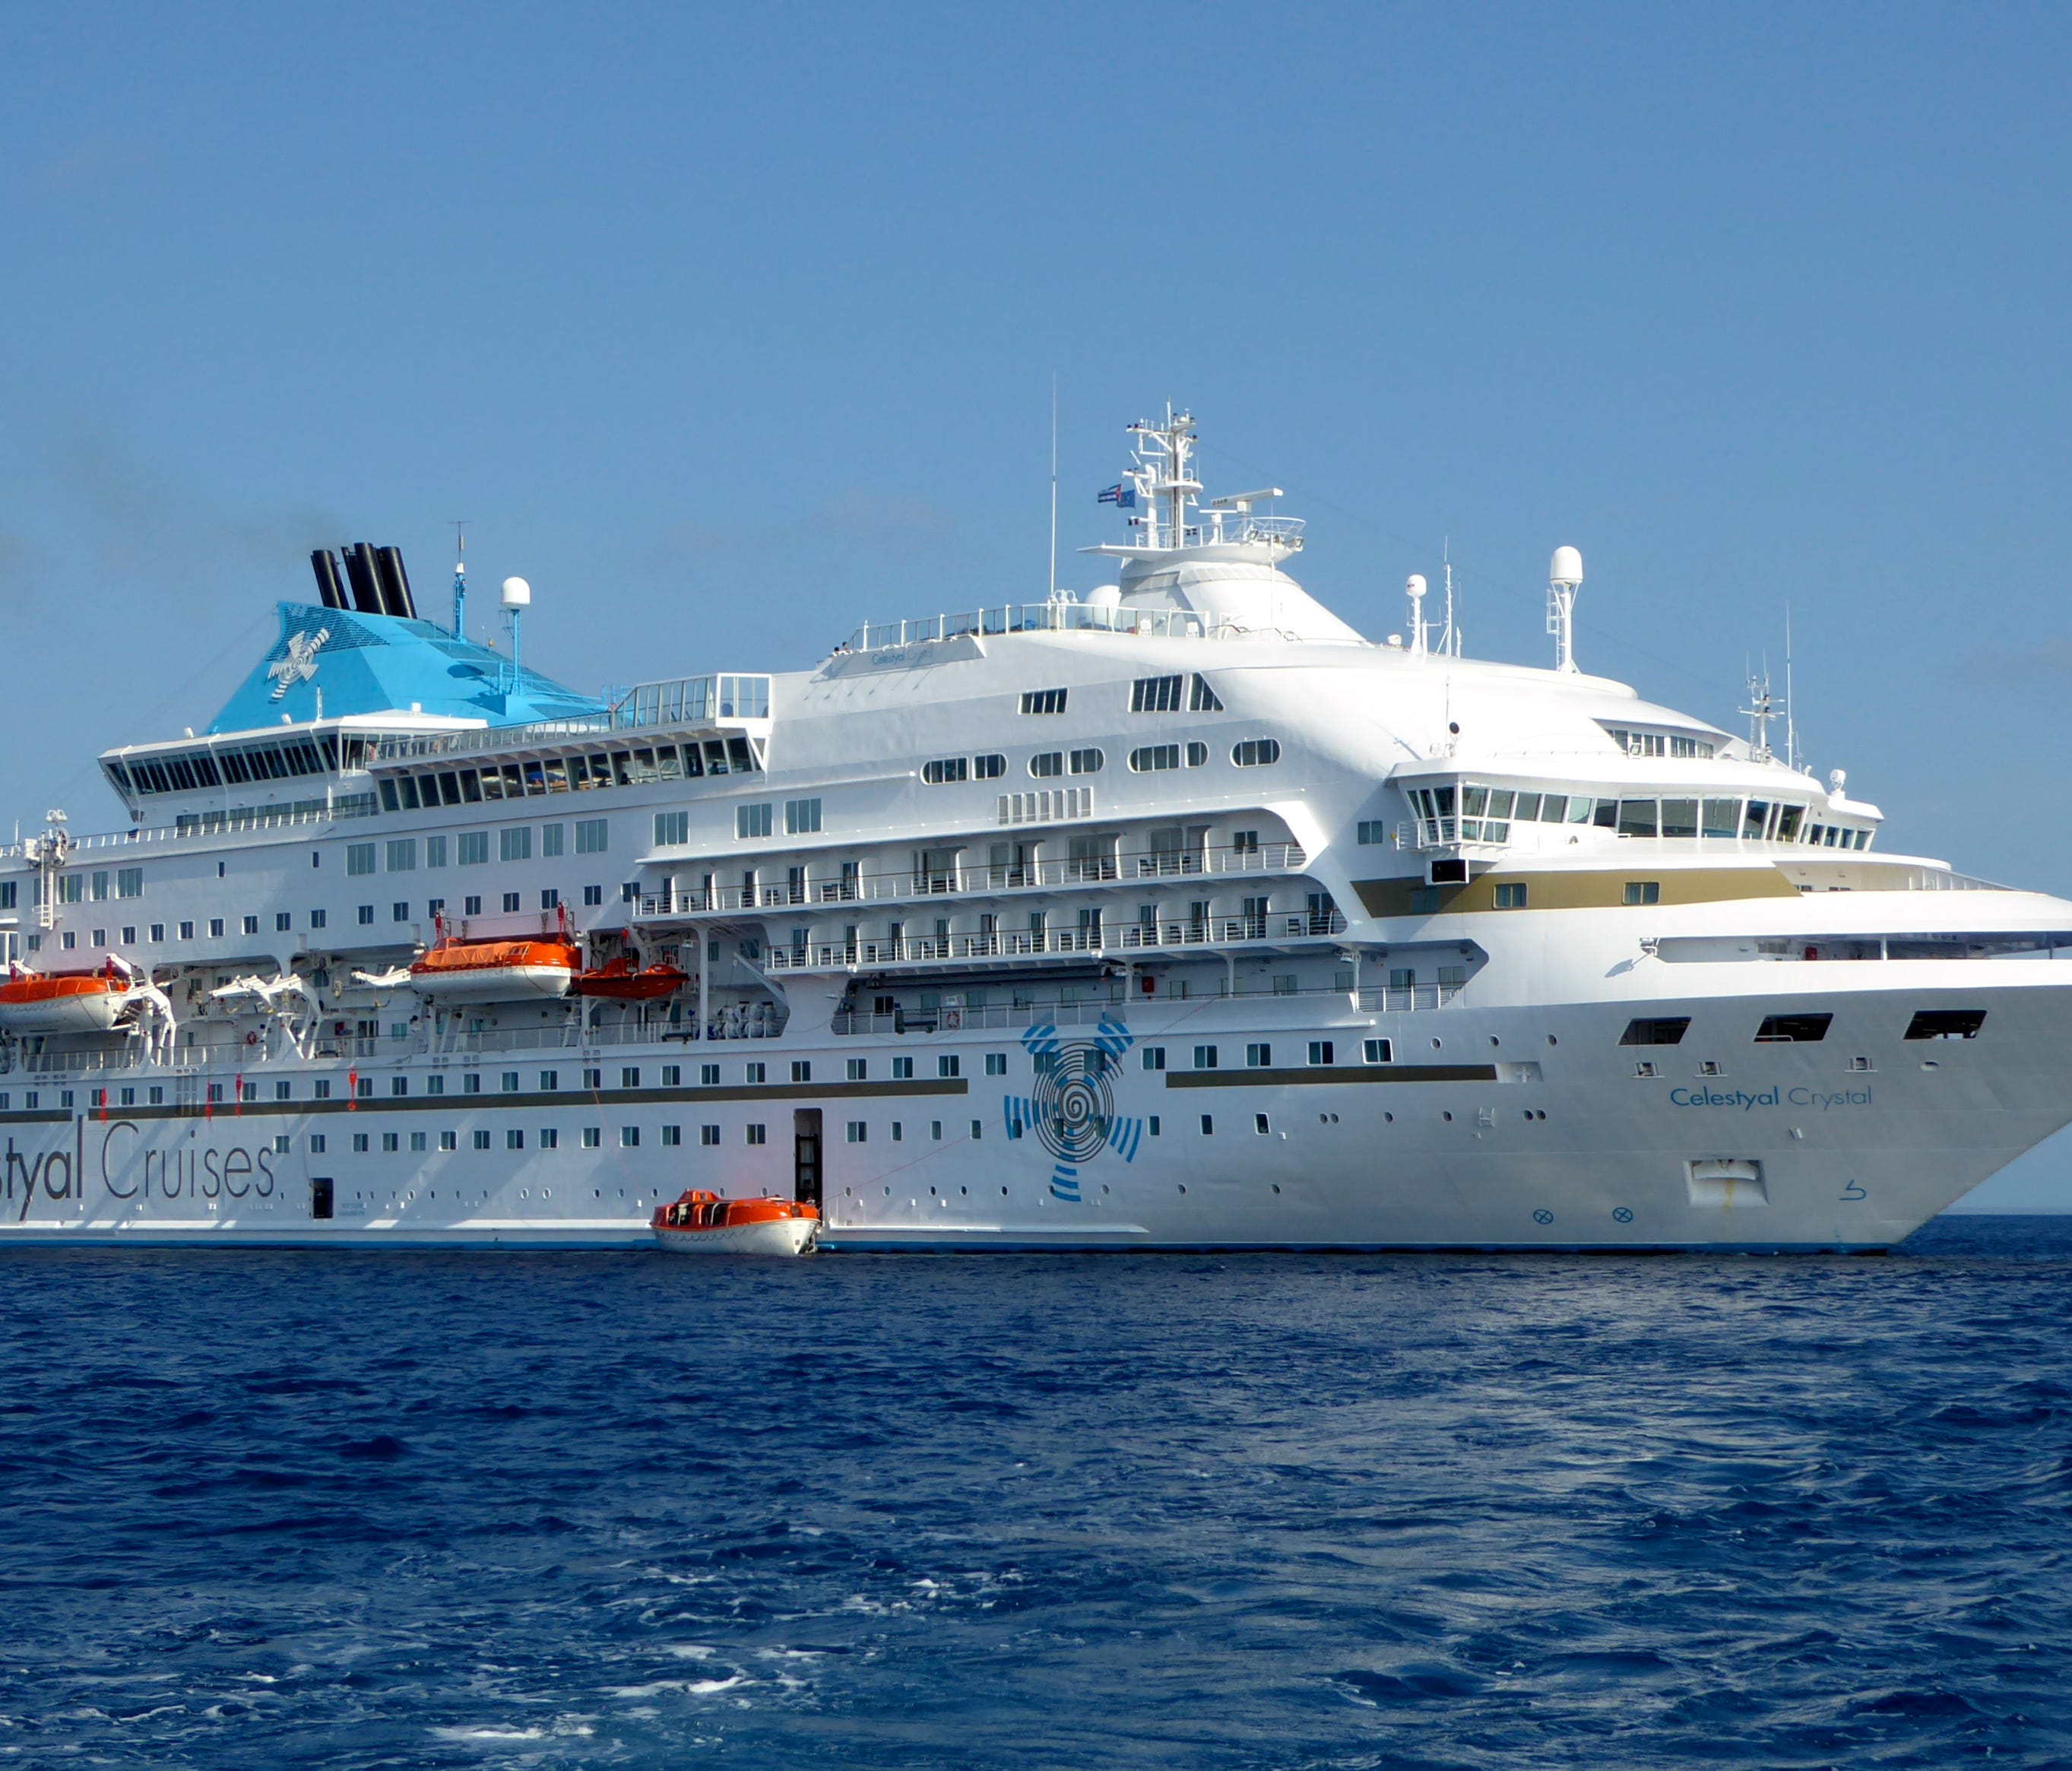 Cypriot-owned Celestyal Cruises' 25,000-gross-ton Celestyal Crystal carries 960 guests.  For three years, the ship has been operating on winter cruise service from Montego Bay, Jamaica, to Cuba and in 2017, it will be based there year-round.